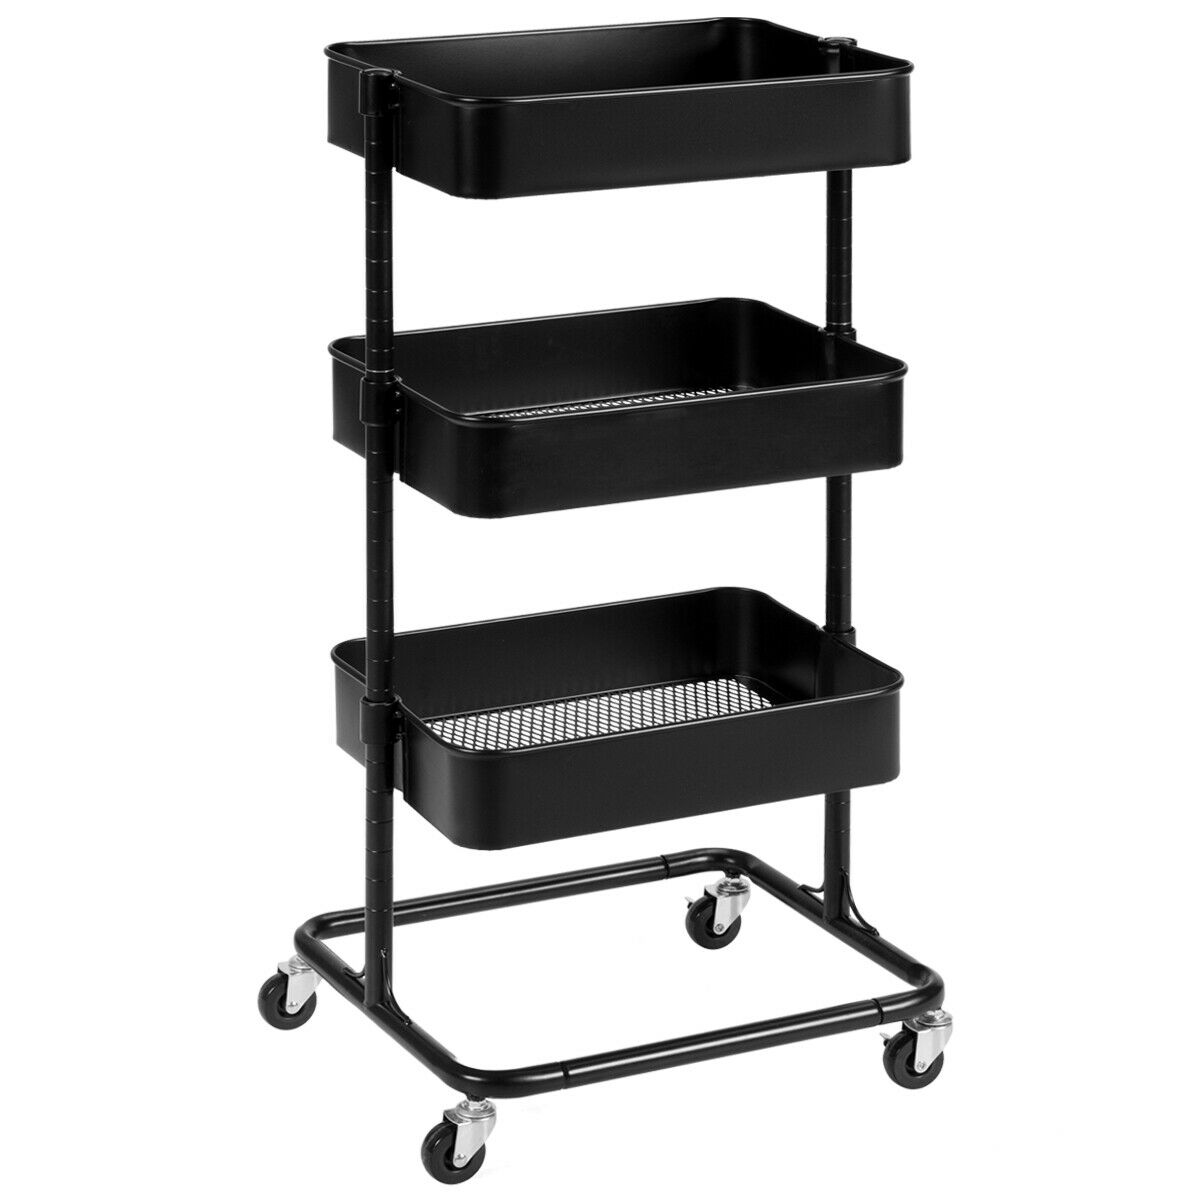 4-Tier Metal Mesh Rolling Storage Cart with Handle Portable Utility Black